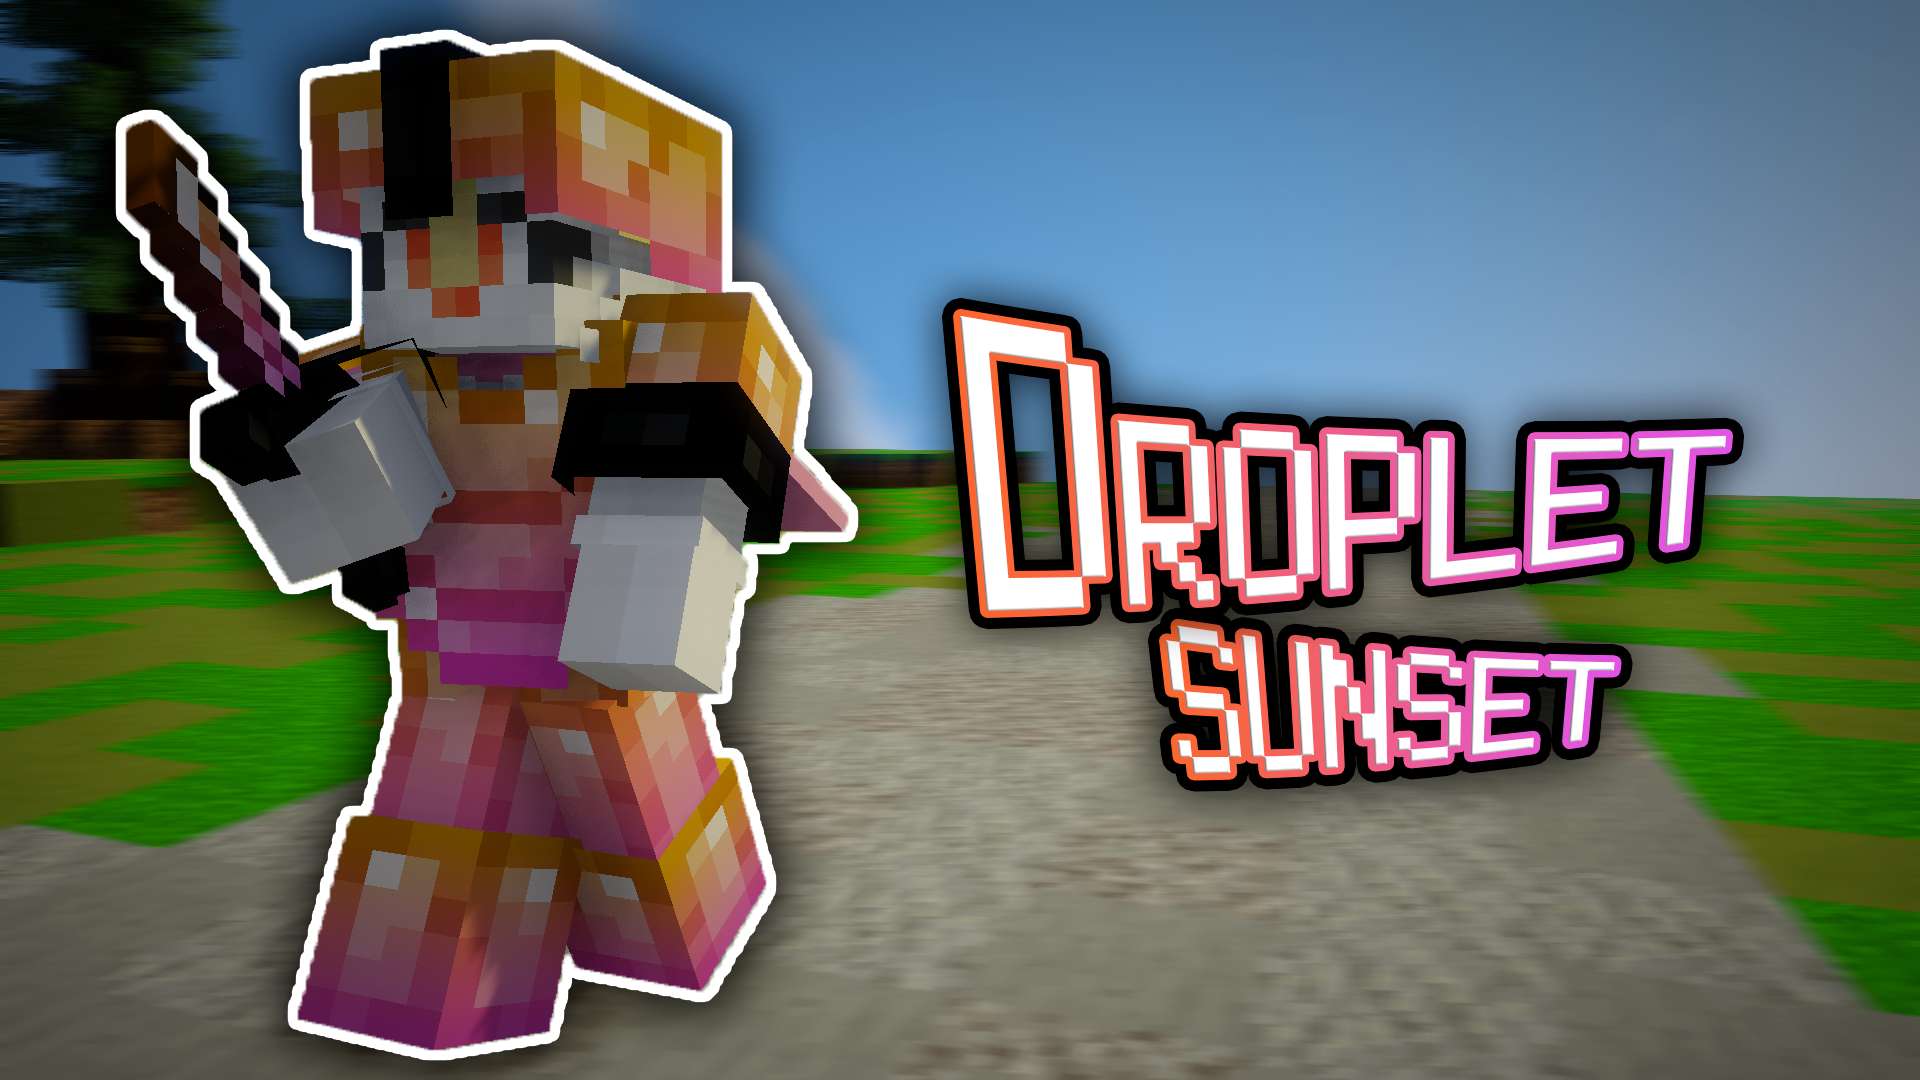 Gallery Banner for Droplet (Sunset) on PvPRP